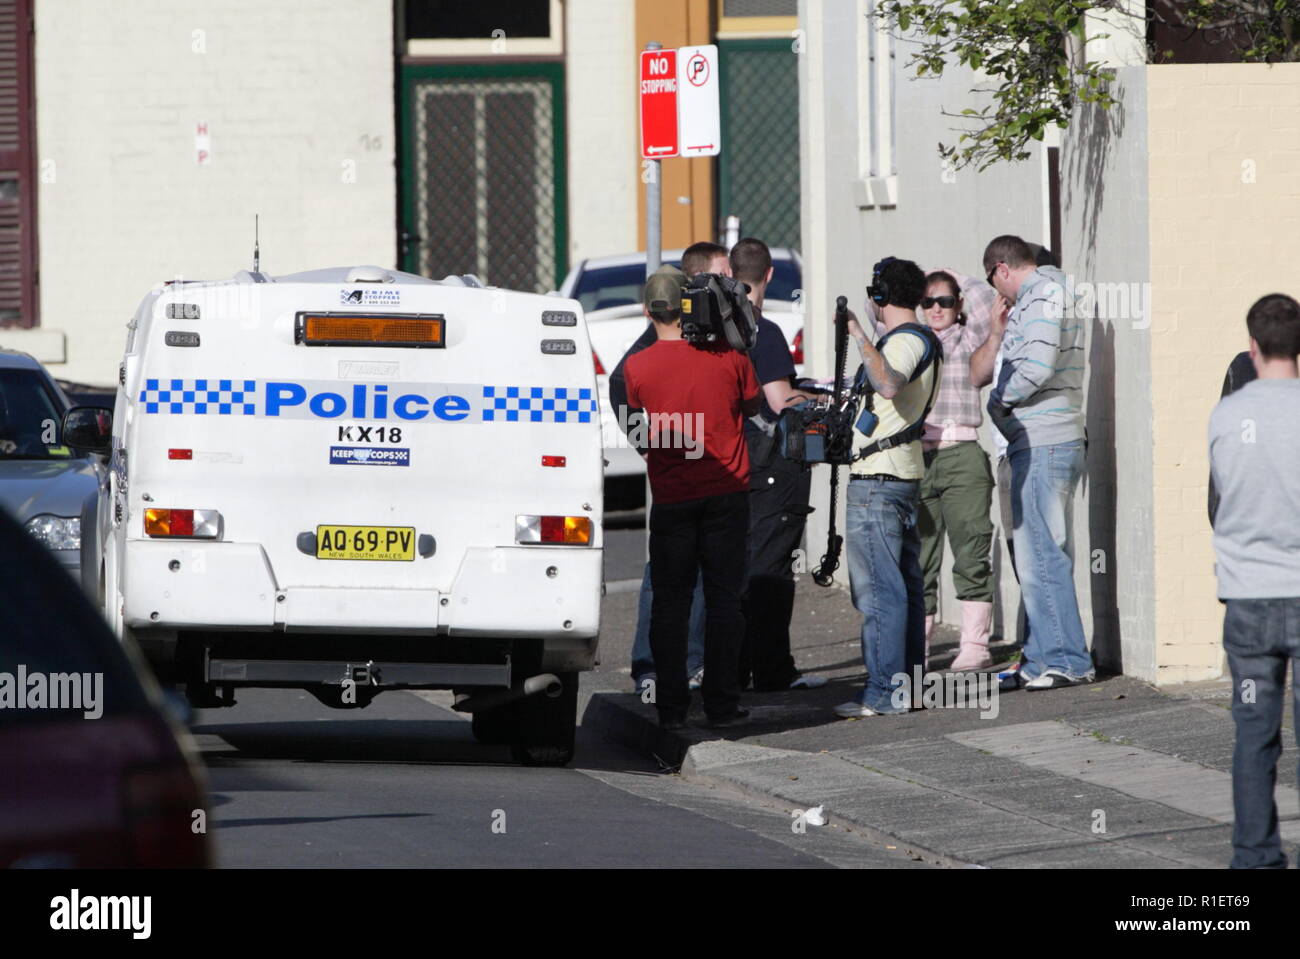 Police investigation in the housing commission projects of Woolloomooloo in Sydney, Australia, while a film crew records the activities for television. Stock Photo